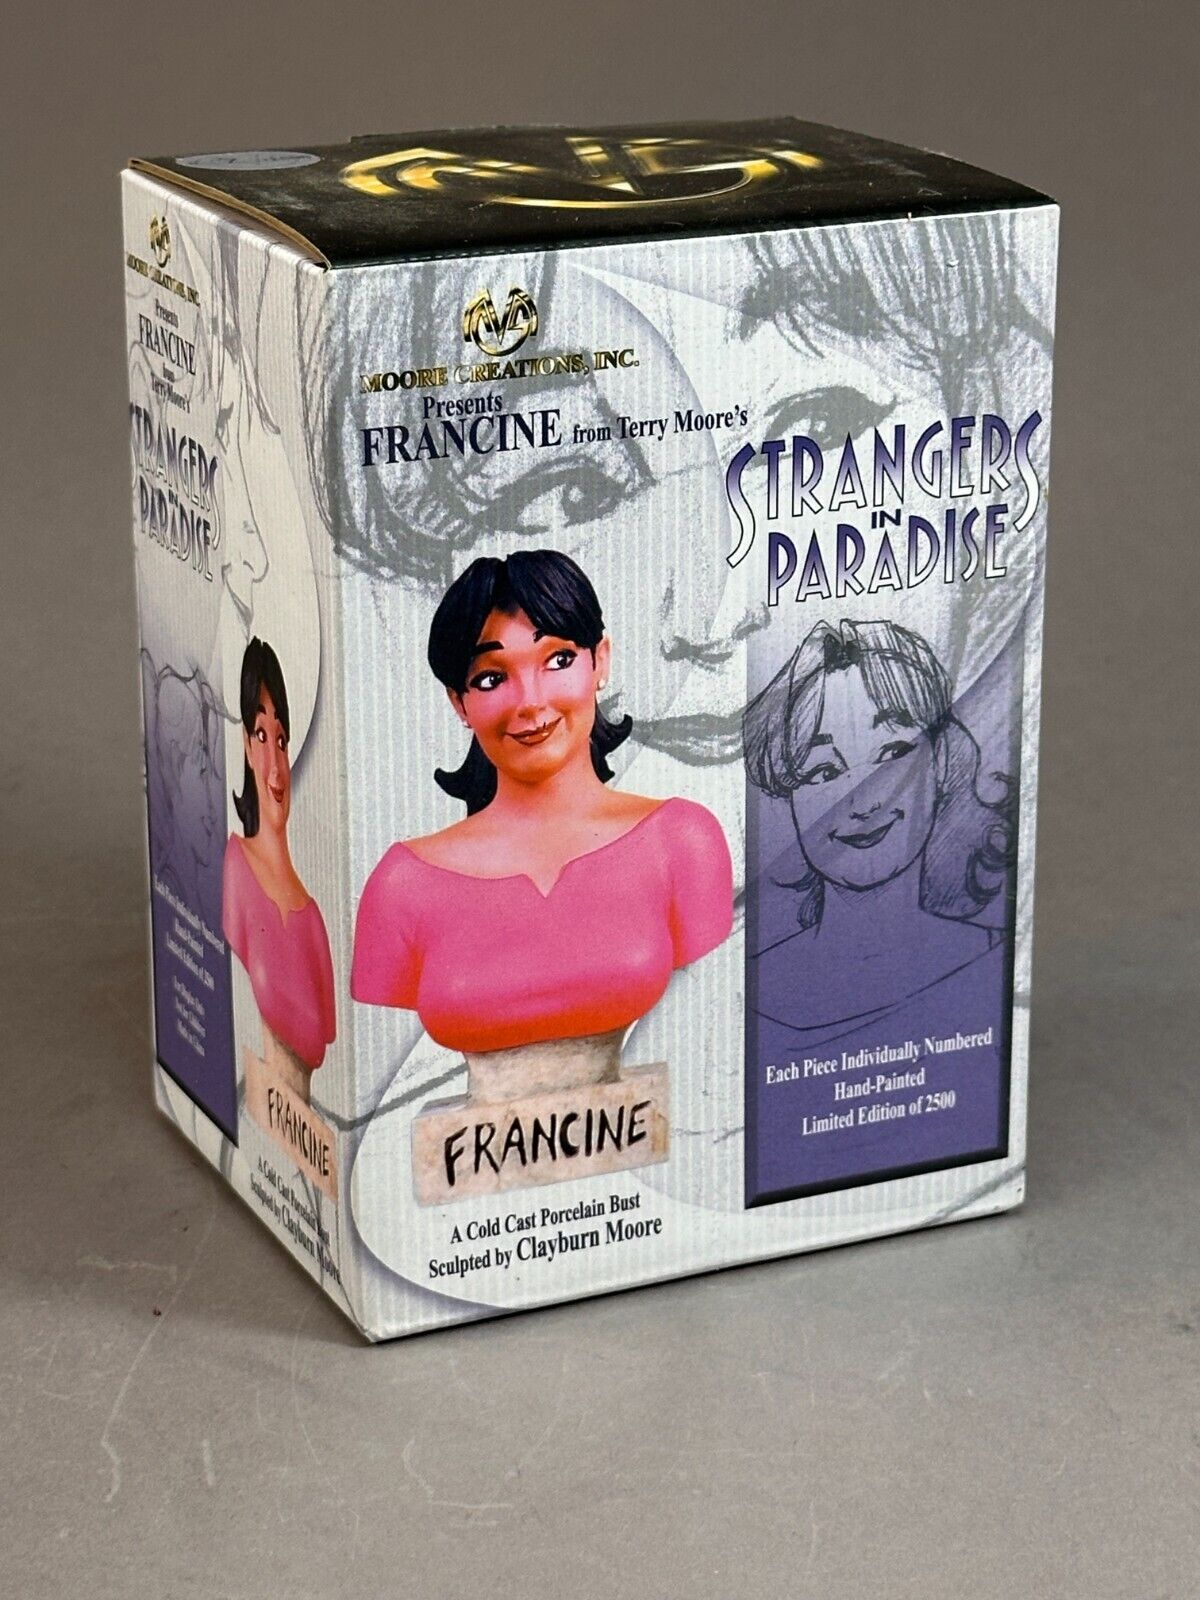 CS Moore Studio and Terry Moore\'s Francine Bust # 6 / 2500 Strangers in Paradise